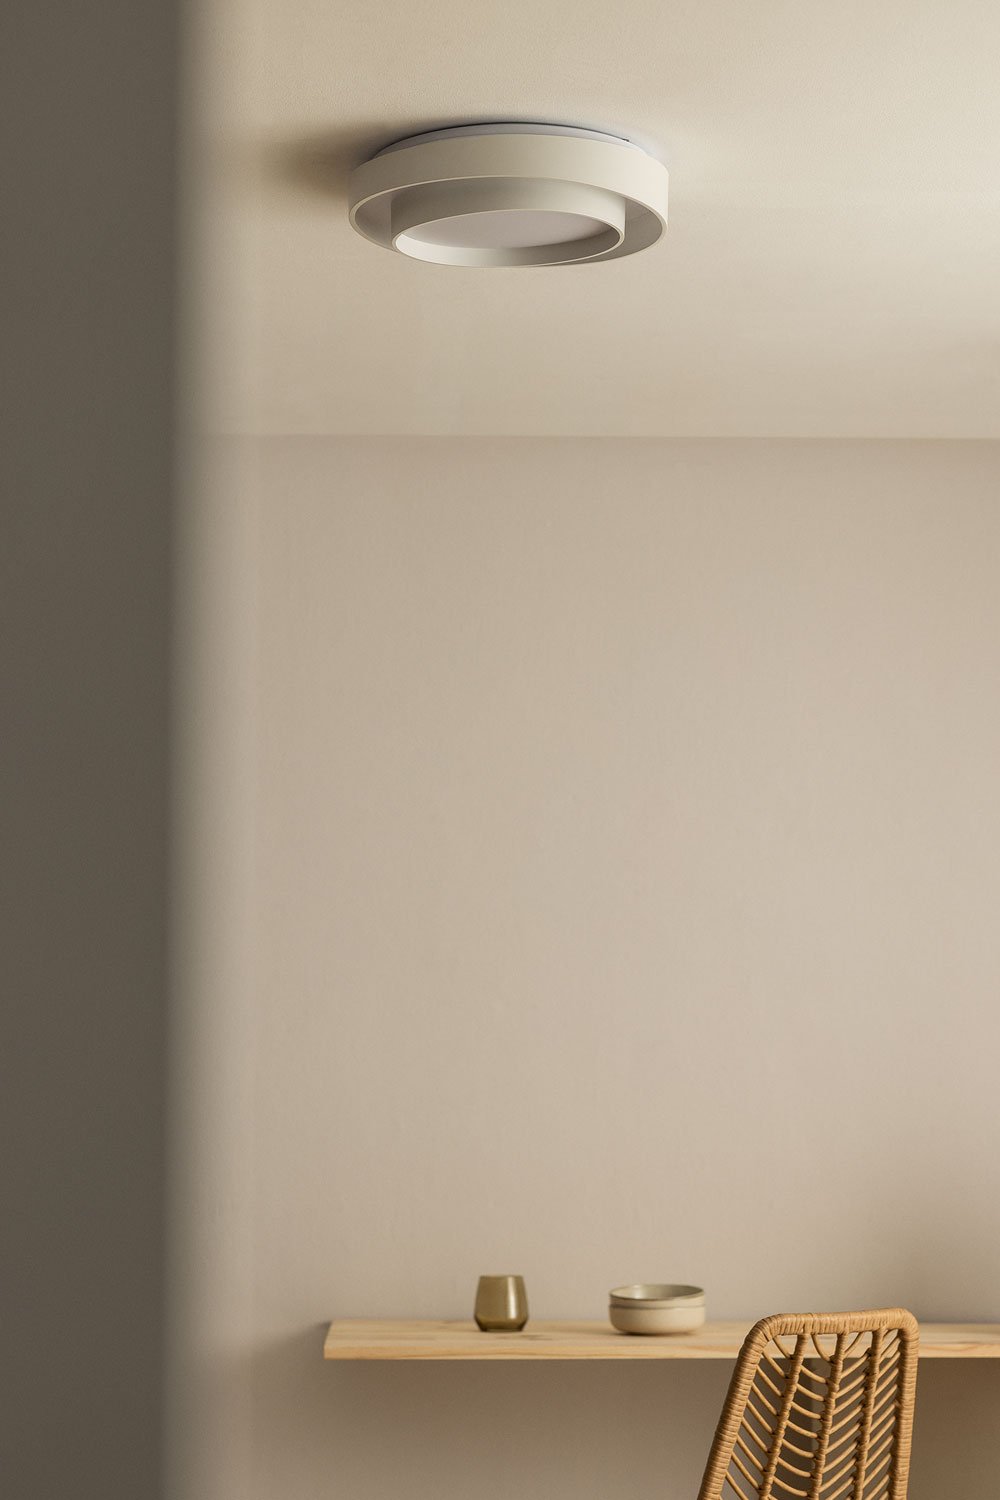 LED Ceiling Light in Methacrylate and Metal Siobam, gallery image 1